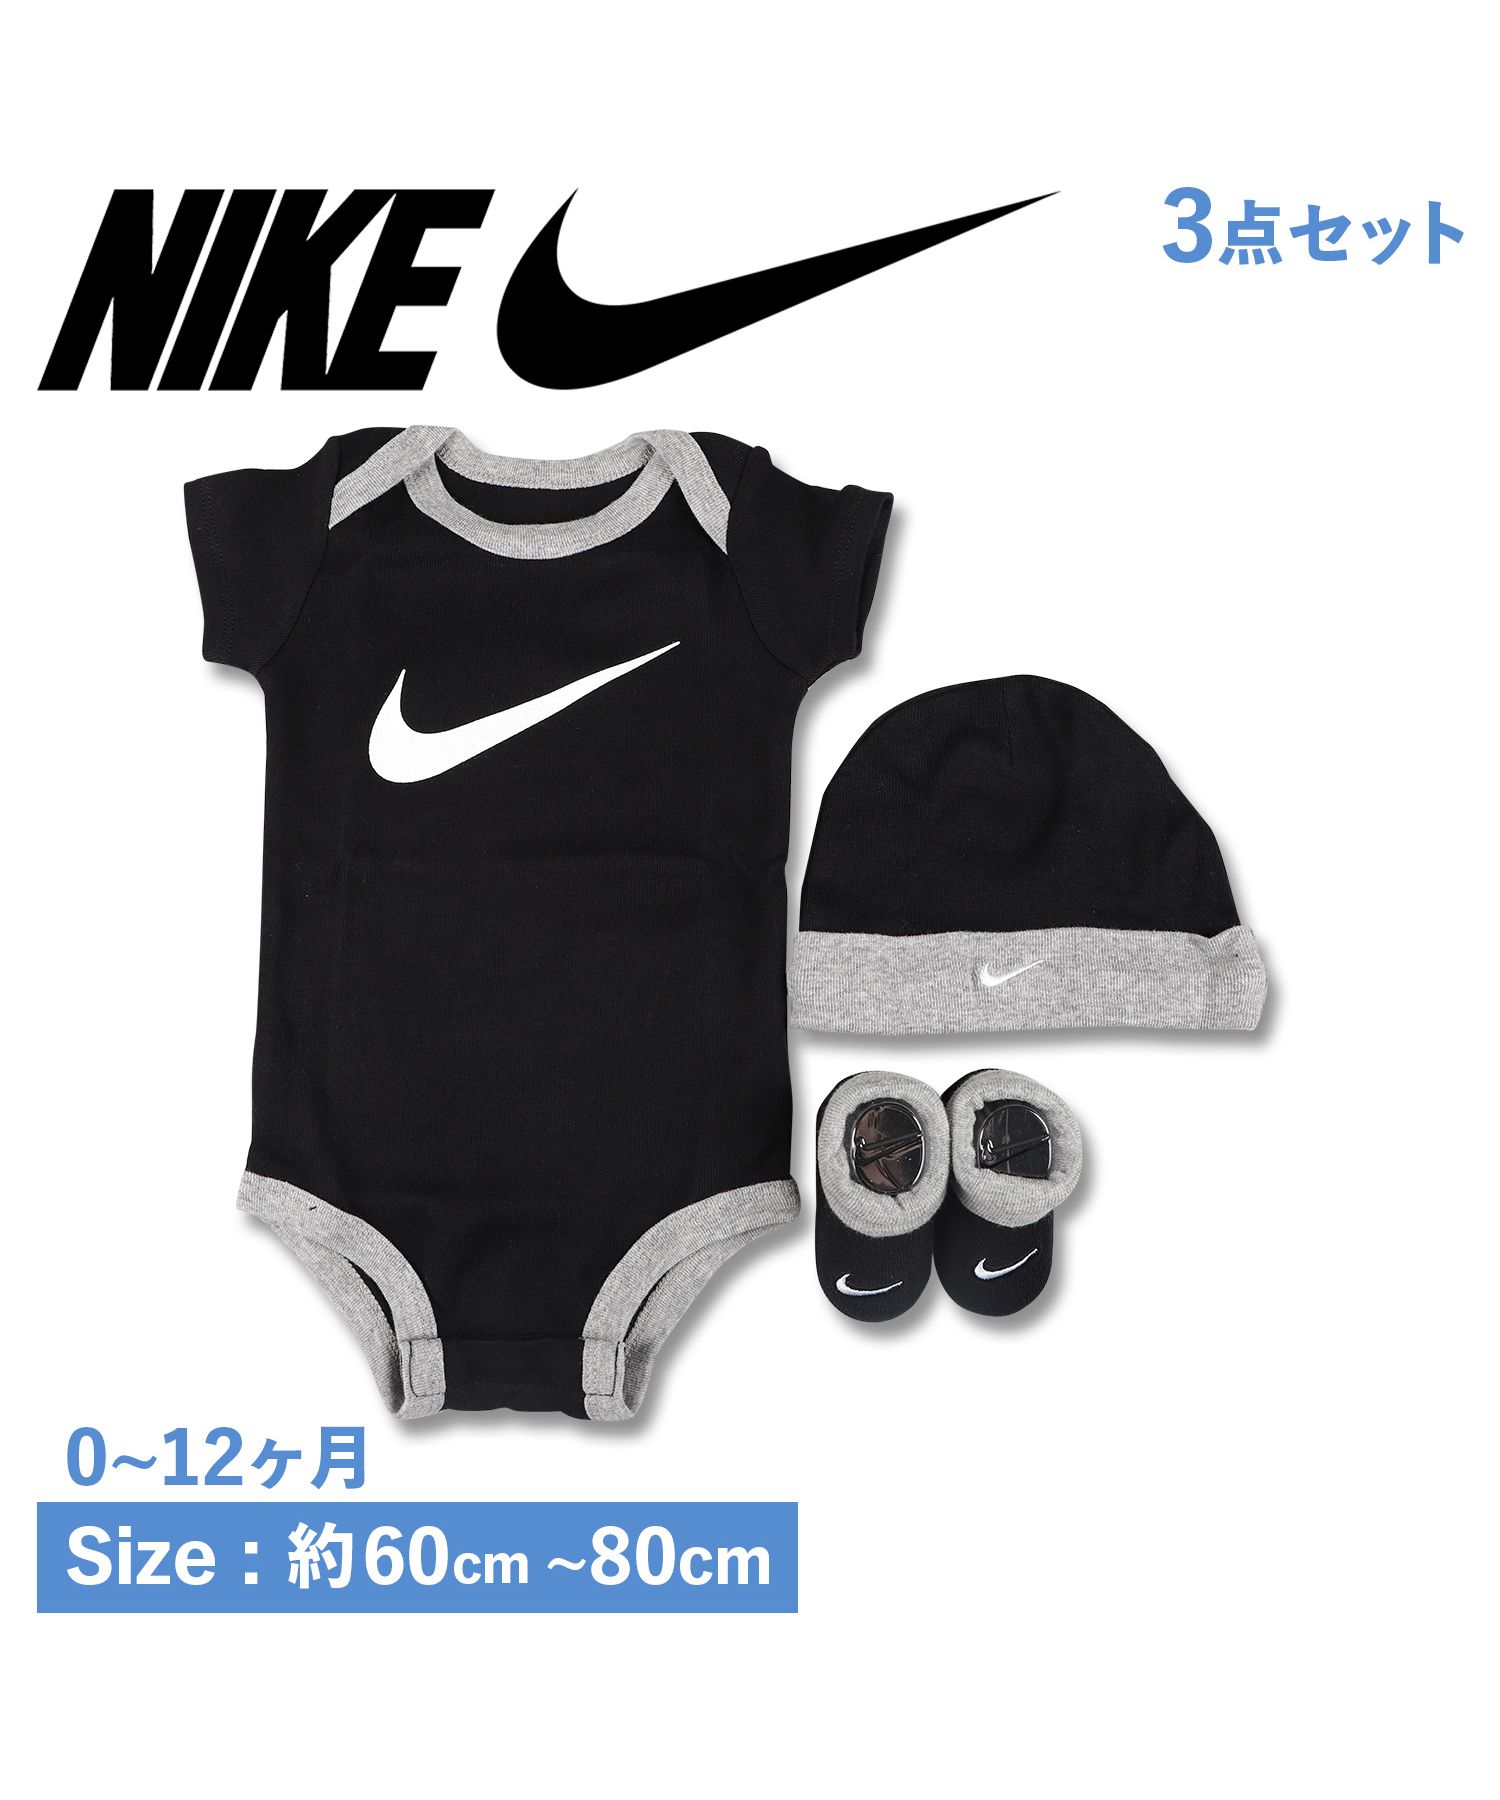 NIKE 3点セット - その他